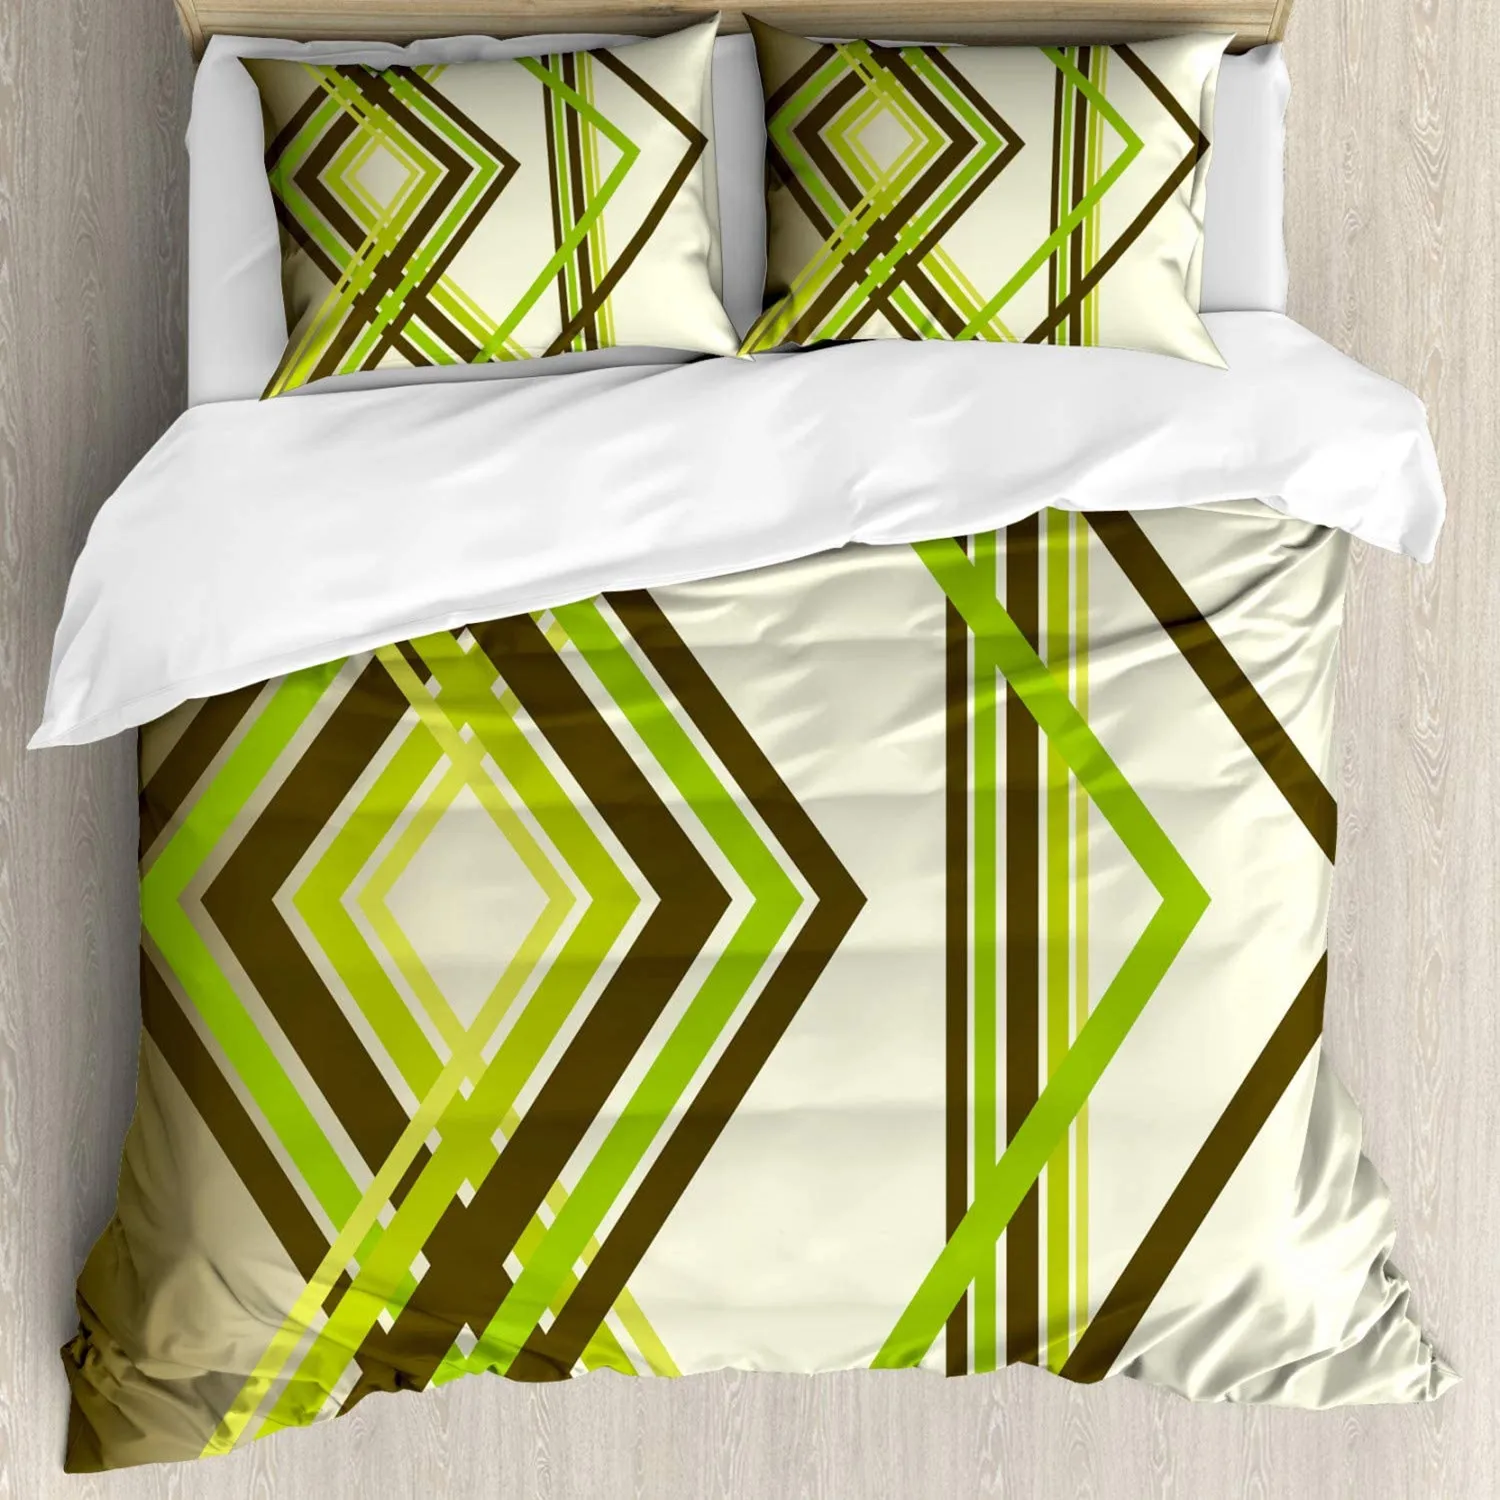 

Abstract Duvet Cover Set Geometric Diamond Shape Bands In Various Shades Polyester Duvet Cover Bedclothes Double Queen King Size